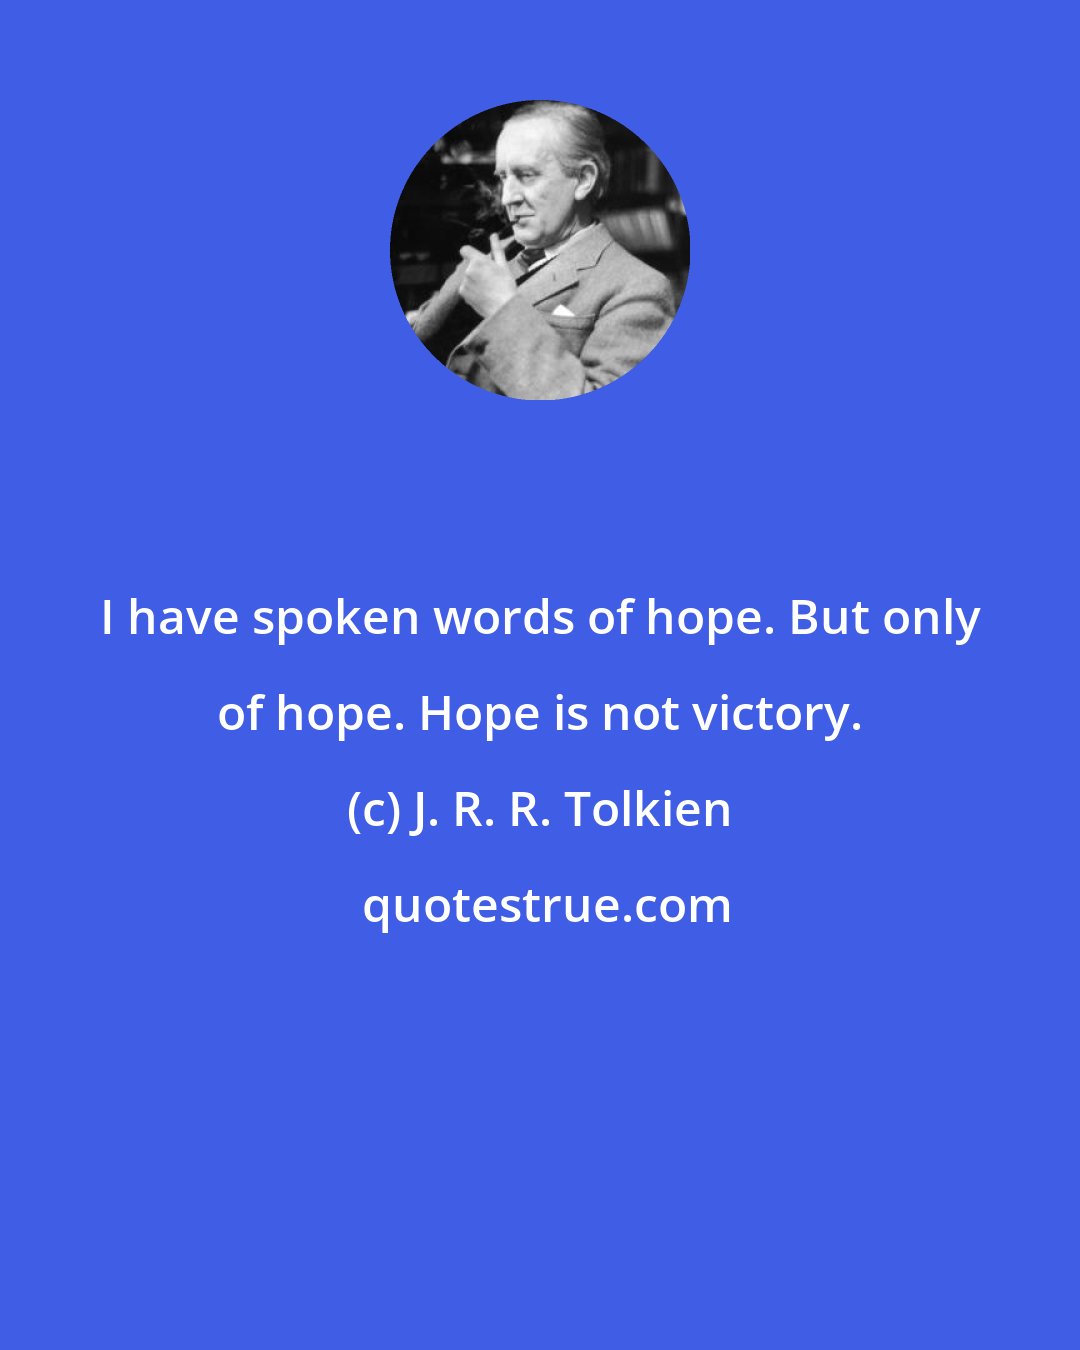 J. R. R. Tolkien: I have spoken words of hope. But only of hope. Hope is not victory.